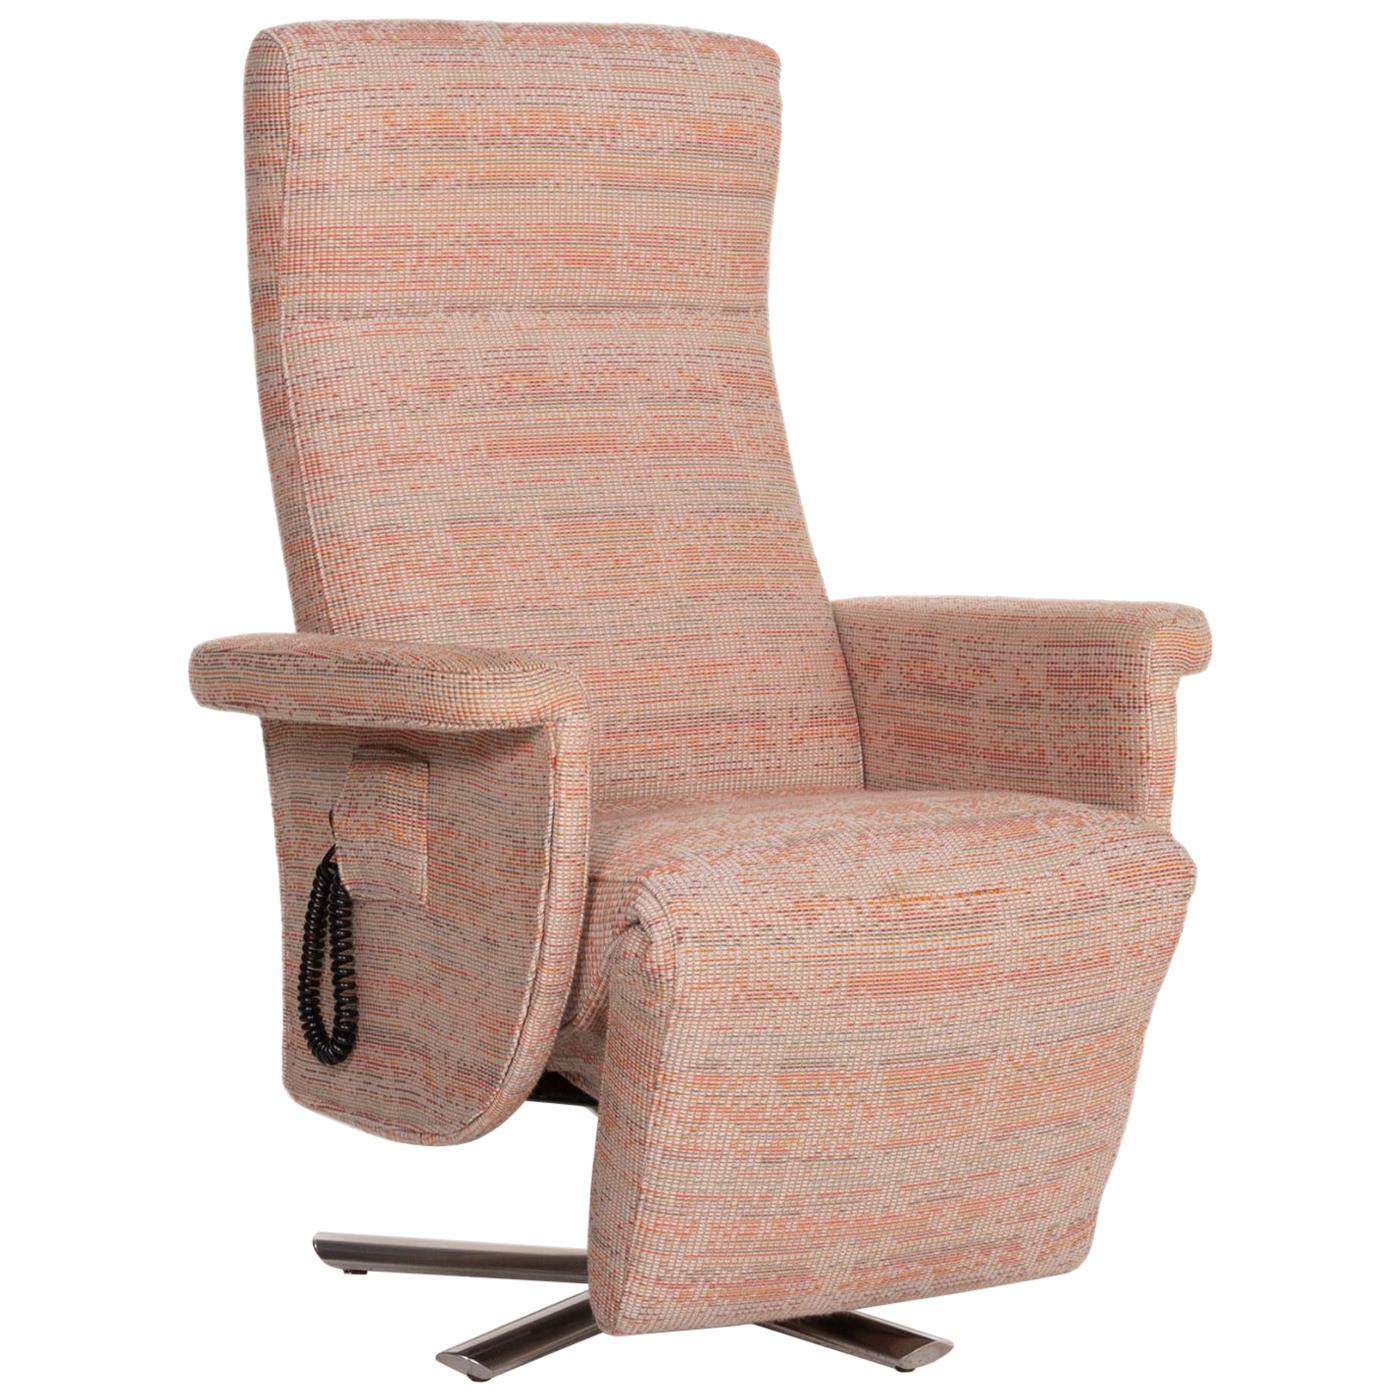 Strässle Fabric Armchair Rosé Beige Pastel Electrical Function Relaxation For Sale